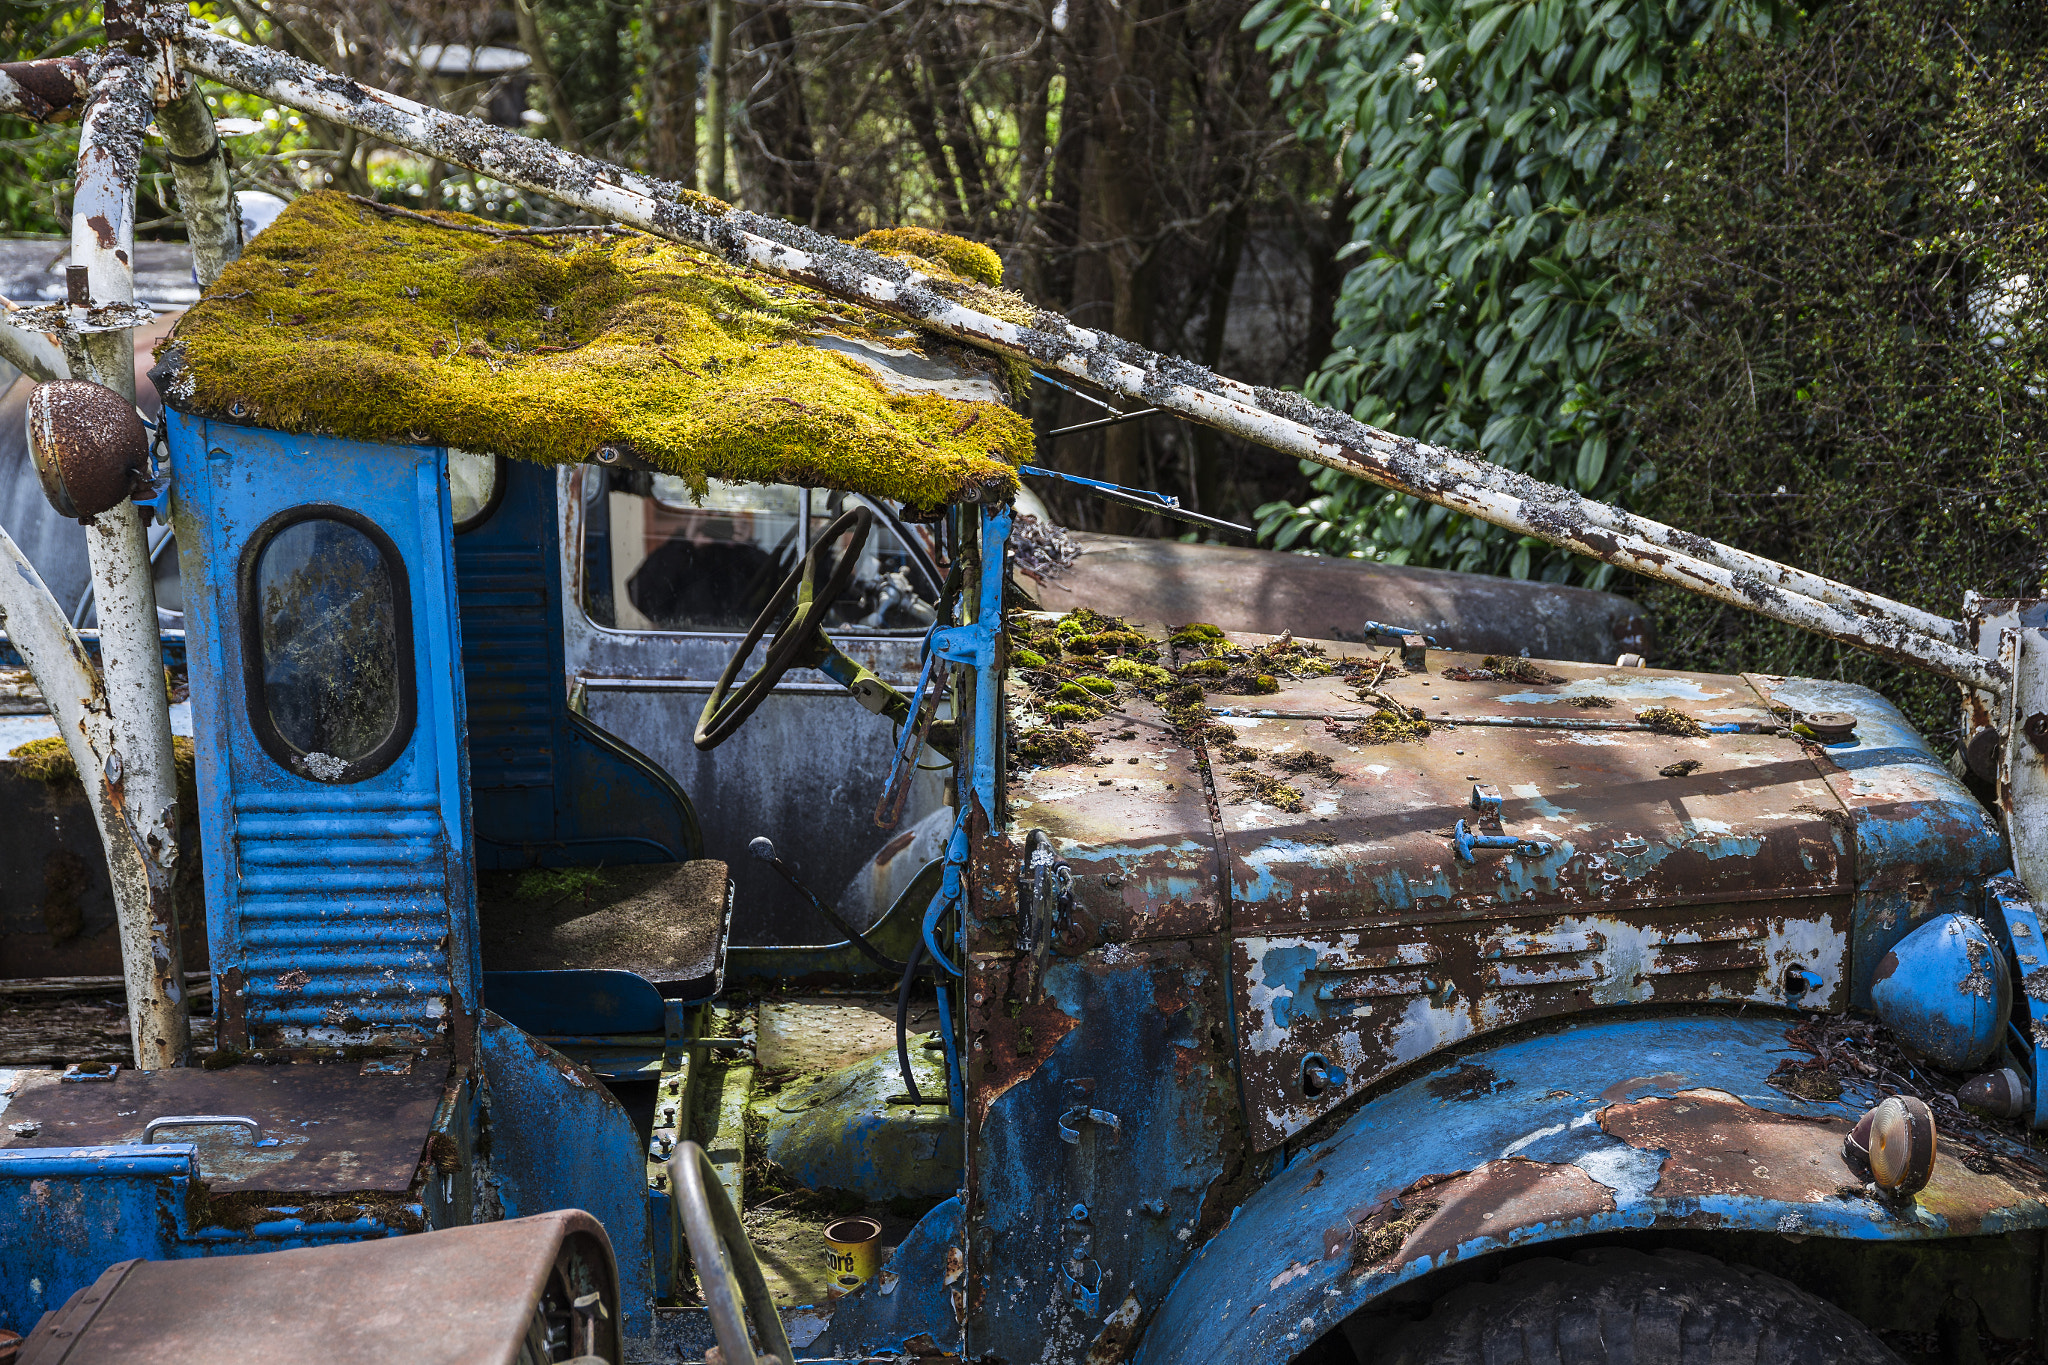 Canon EOS 6D + Sigma 24-105mm f/4 DG OS HSM | A sample photo. Old truck photography